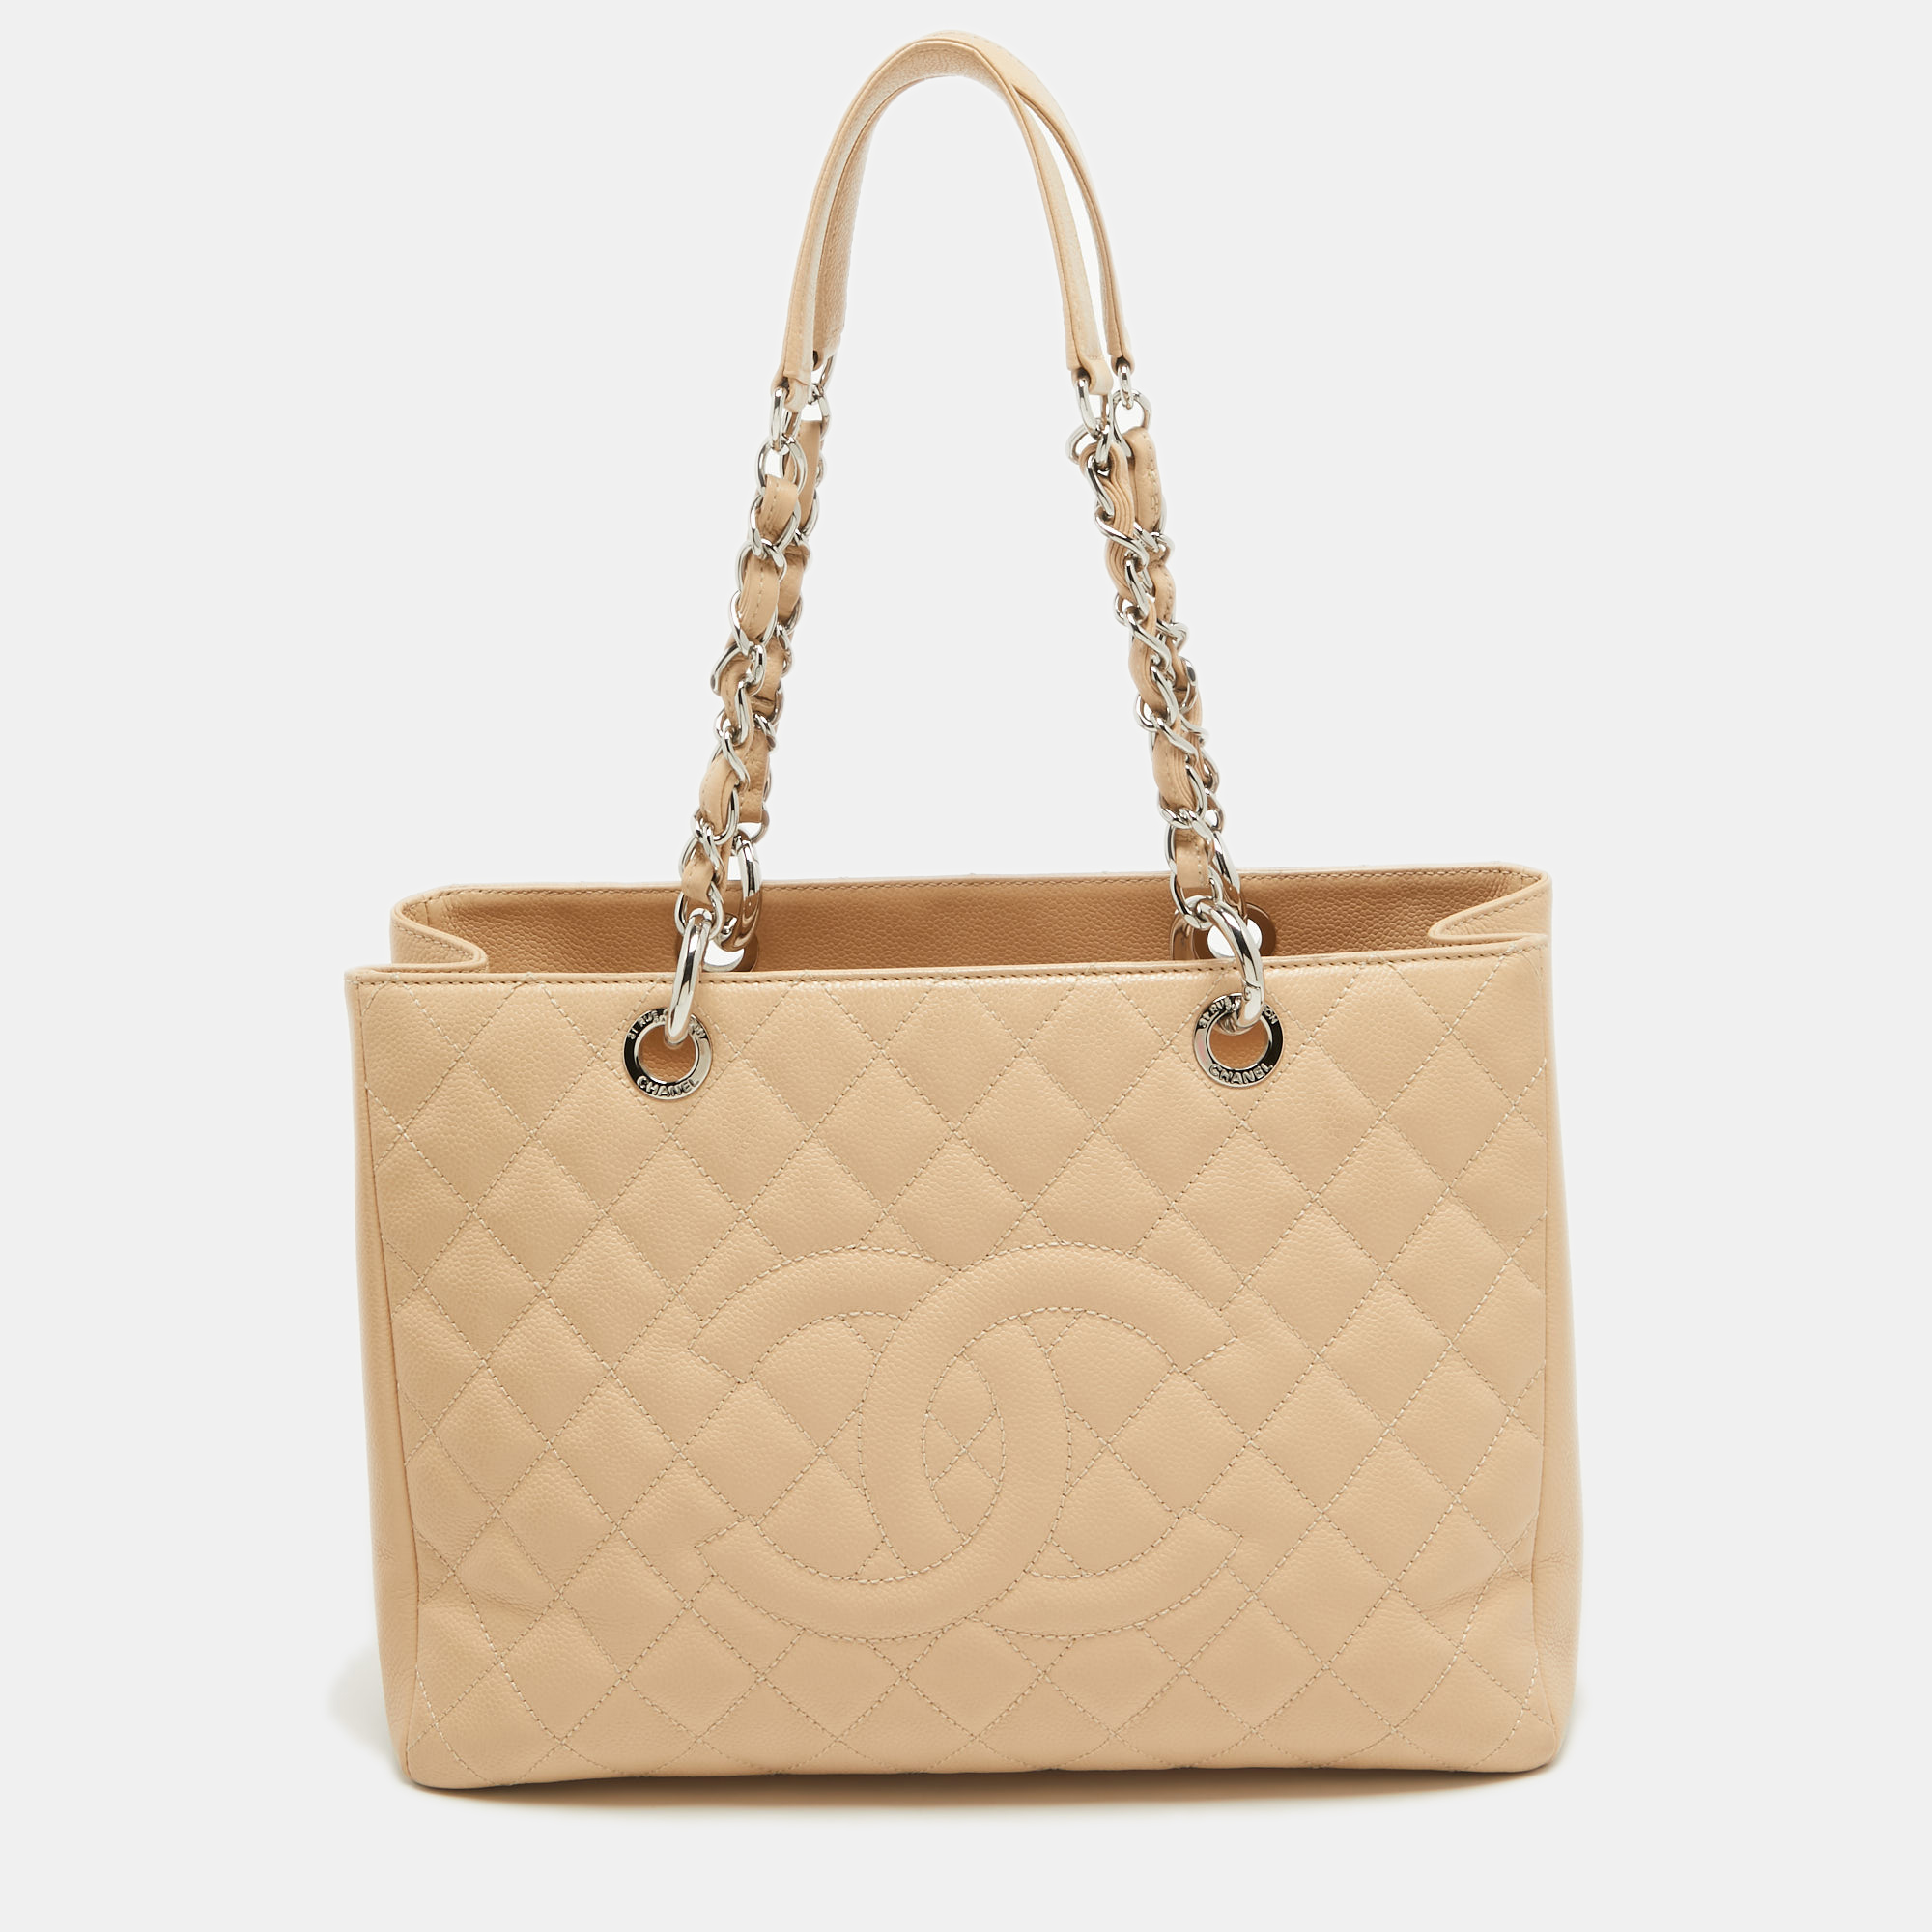 Chanel beige quilted caviar leather gst shopper tote